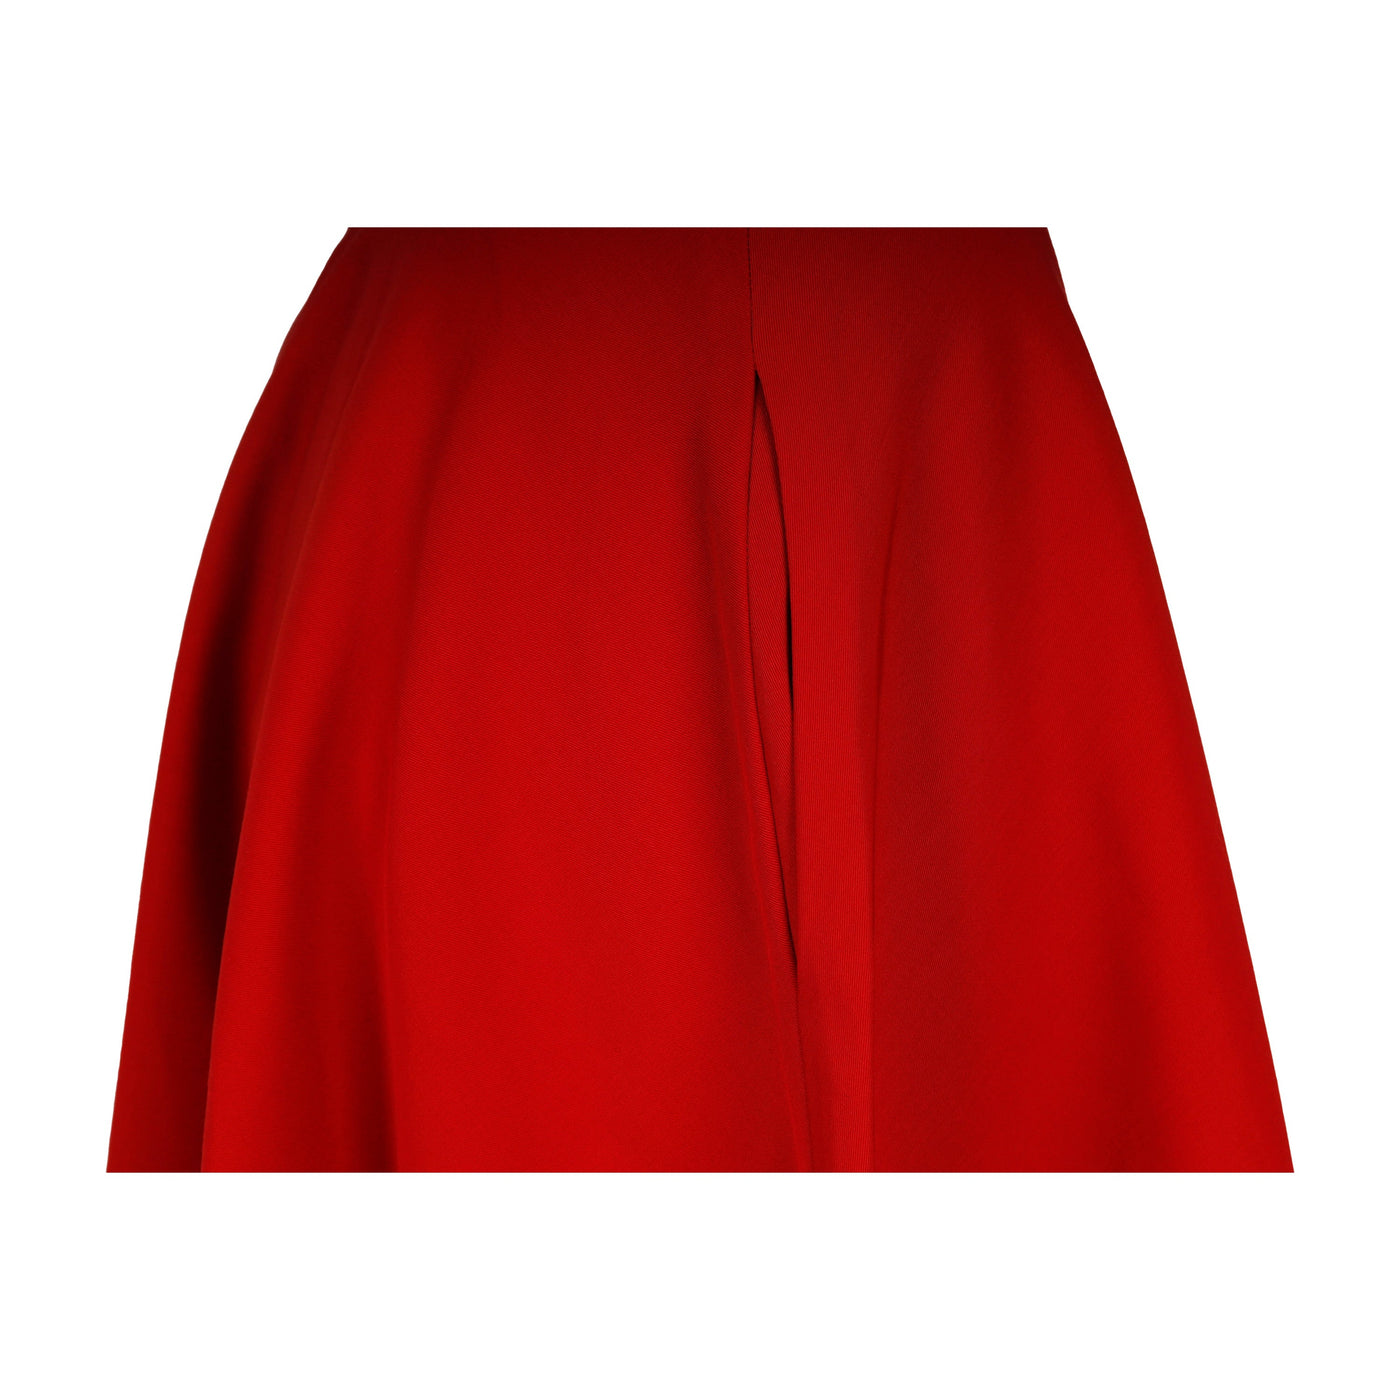 Secondhand Moschino Cheap and Chic Flared Skirt